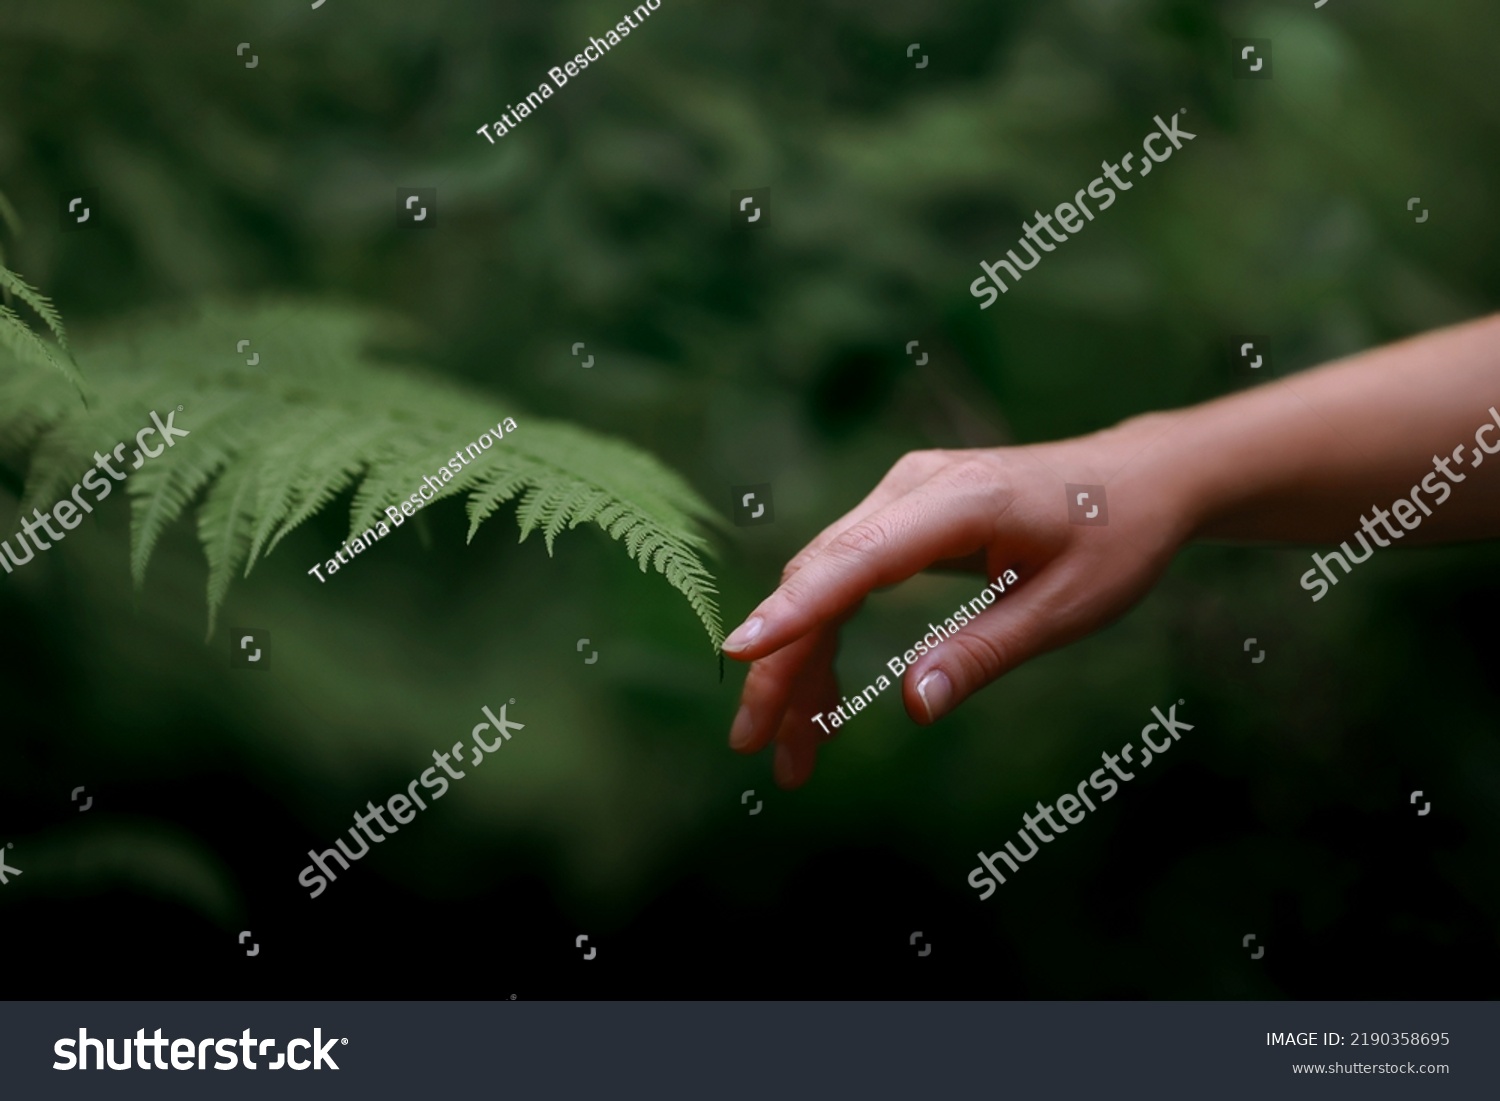 A woman's hand and a fern leaf. Man and nature #2190358695